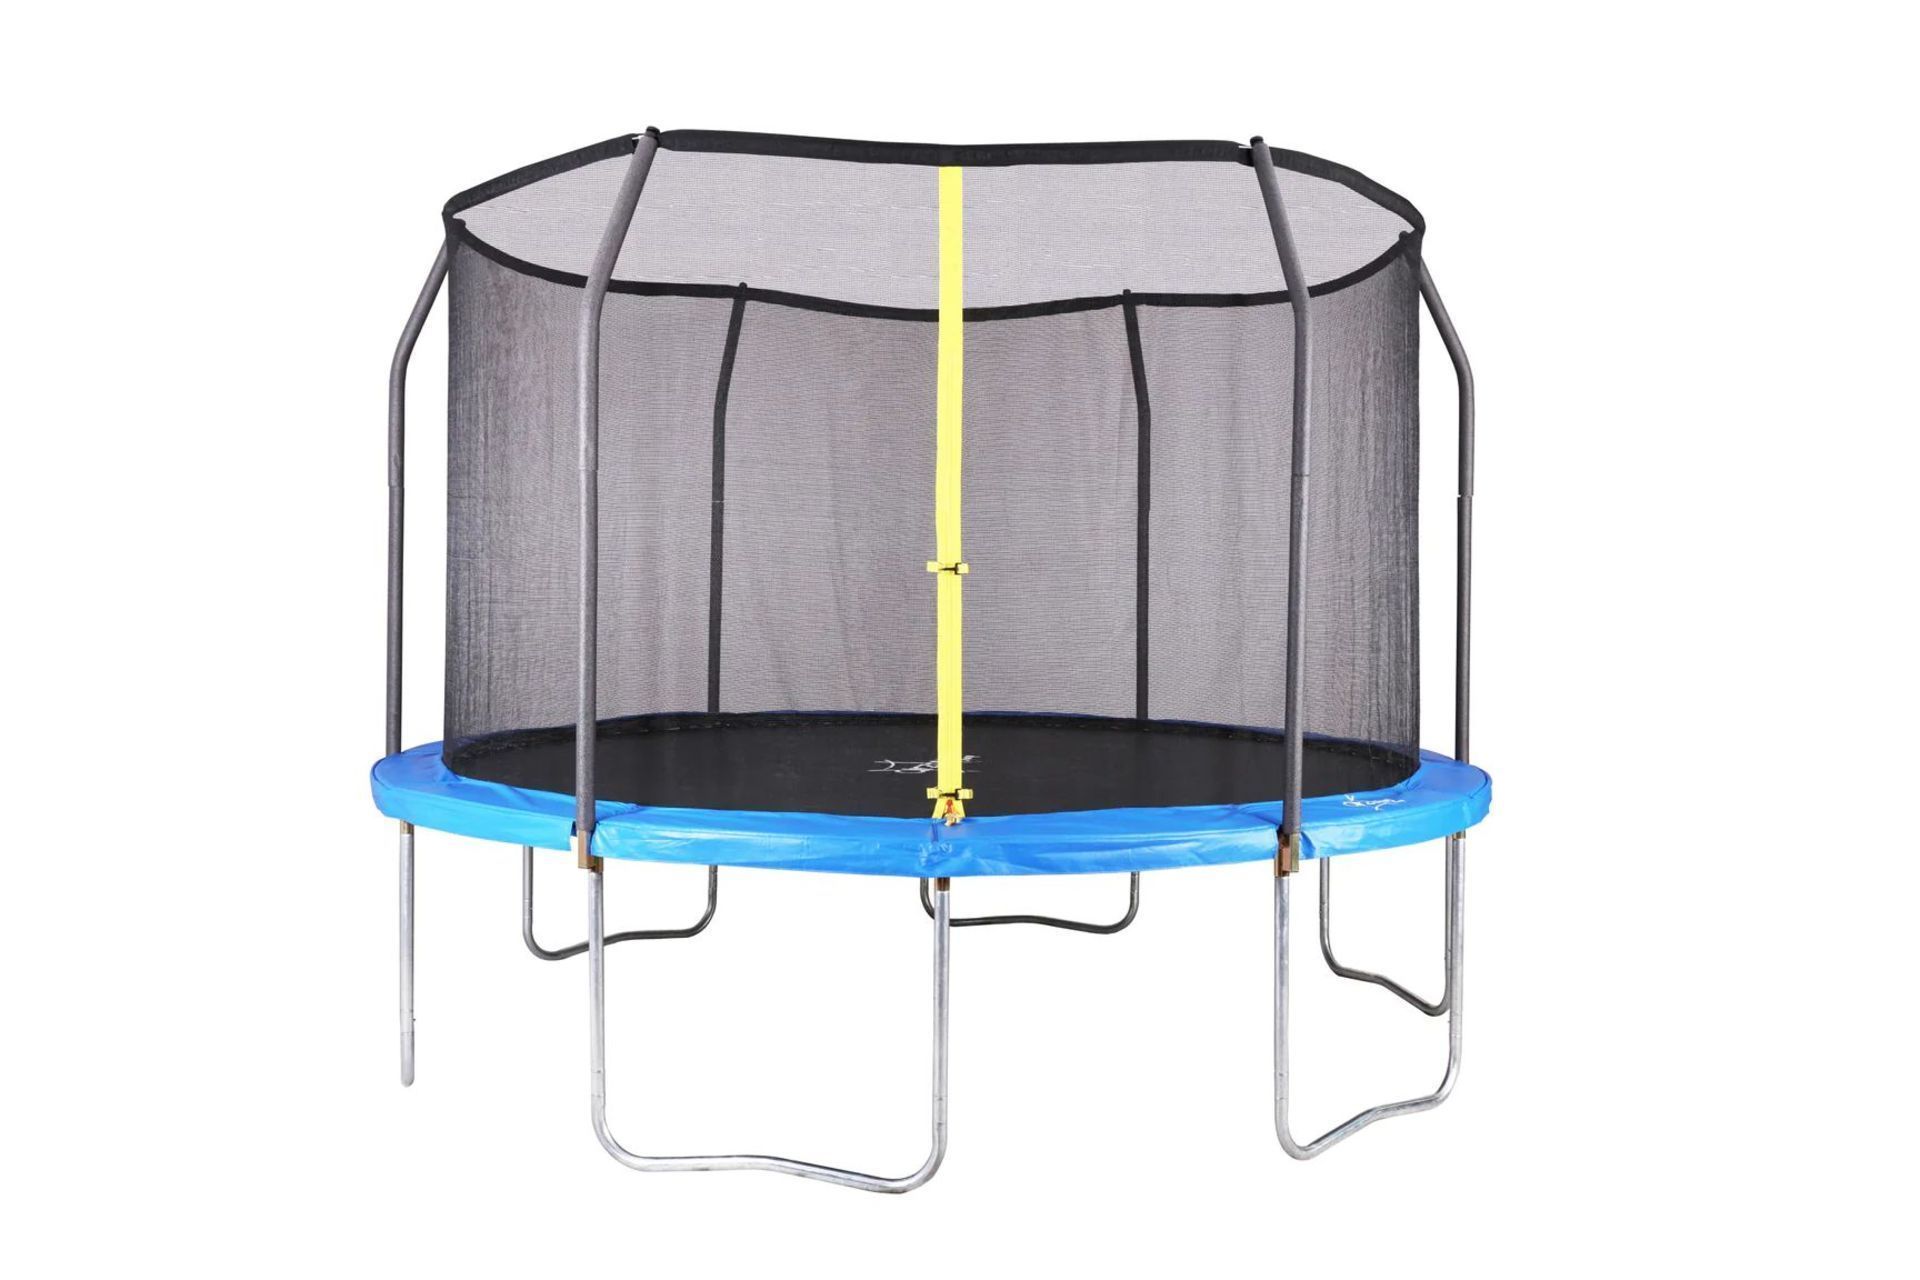 Pallet To Contain 6 x New & Boxed Airzone 14 Foot Trampoline with Enclosure. The AirZone Jump 14